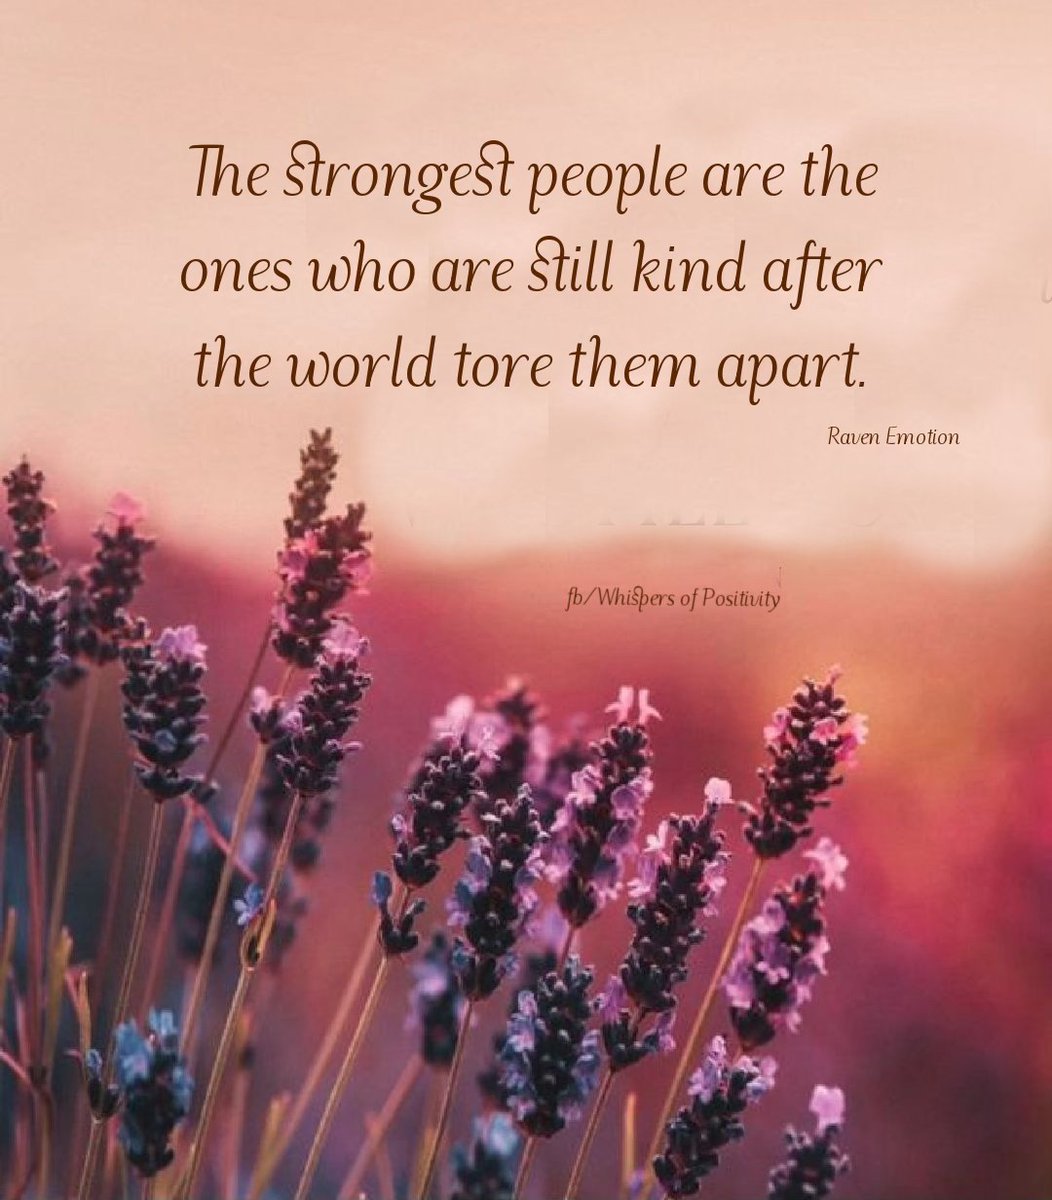 The strongest people are the ones who are still kind after the world tore them apart. - Raven Emotion